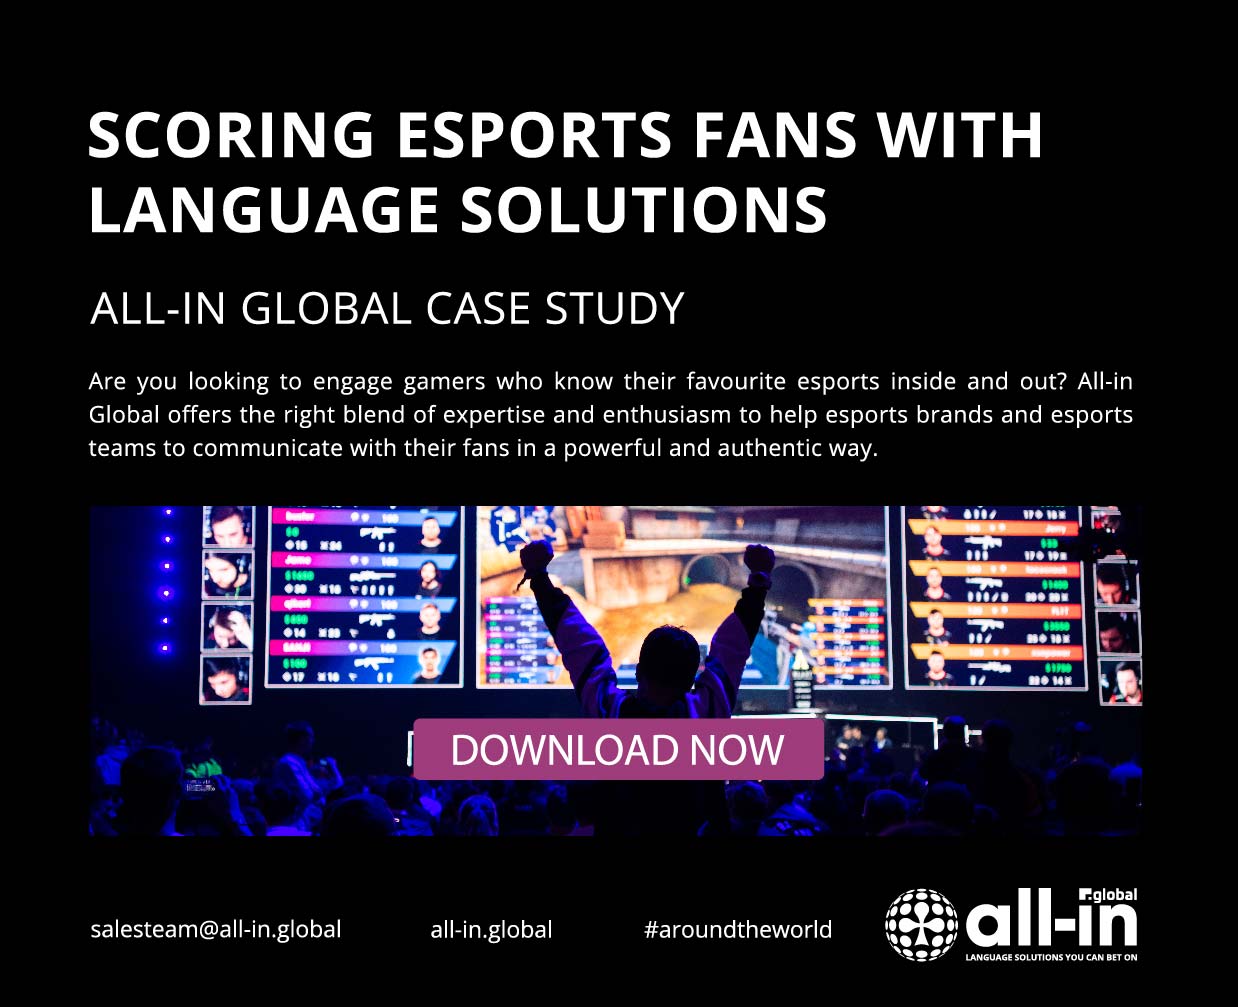 All-in Global Case Study